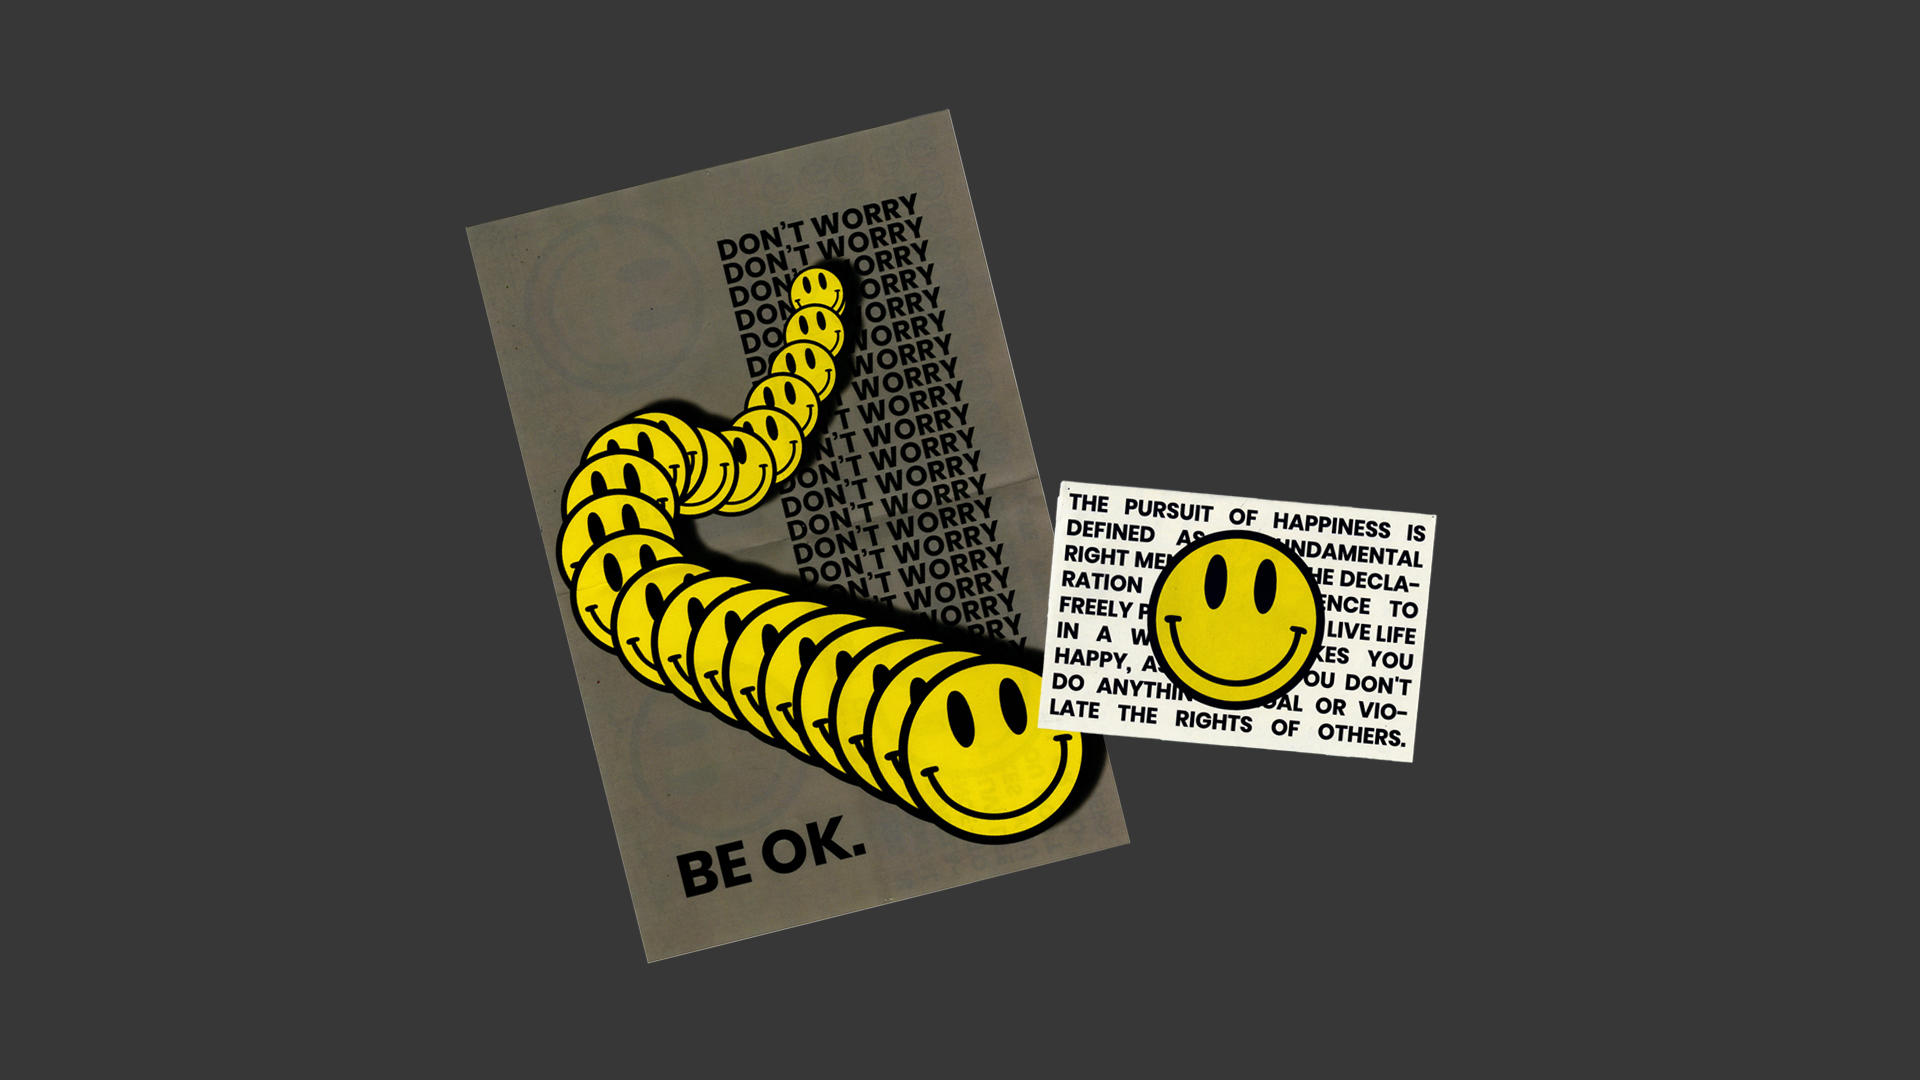 Poster design with the text 'Don't worry. Be OK.' and smiley face graphics